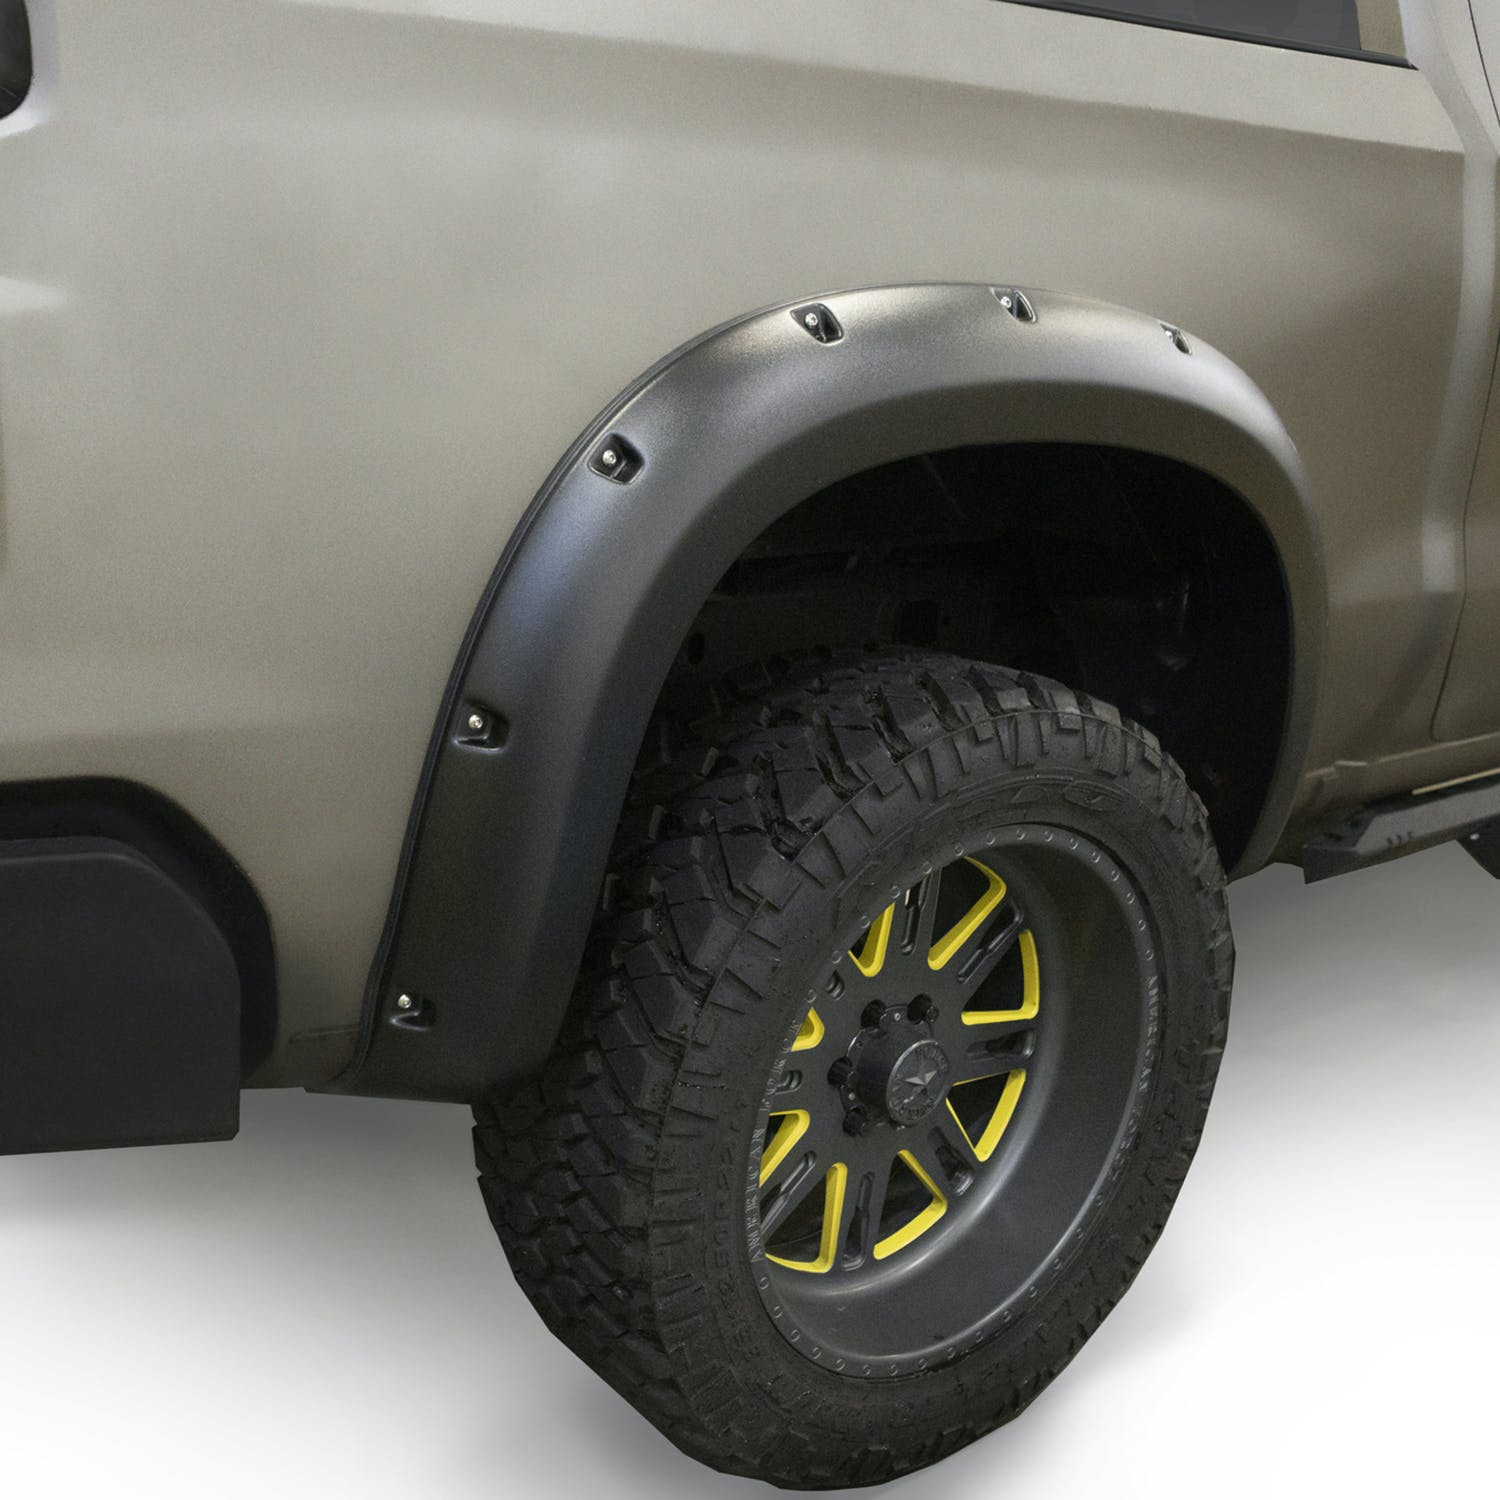 LUND RX140TB RX-Style Fender Flares 2pc Textured RX-RIVET STYLE 2PC TEXTURED